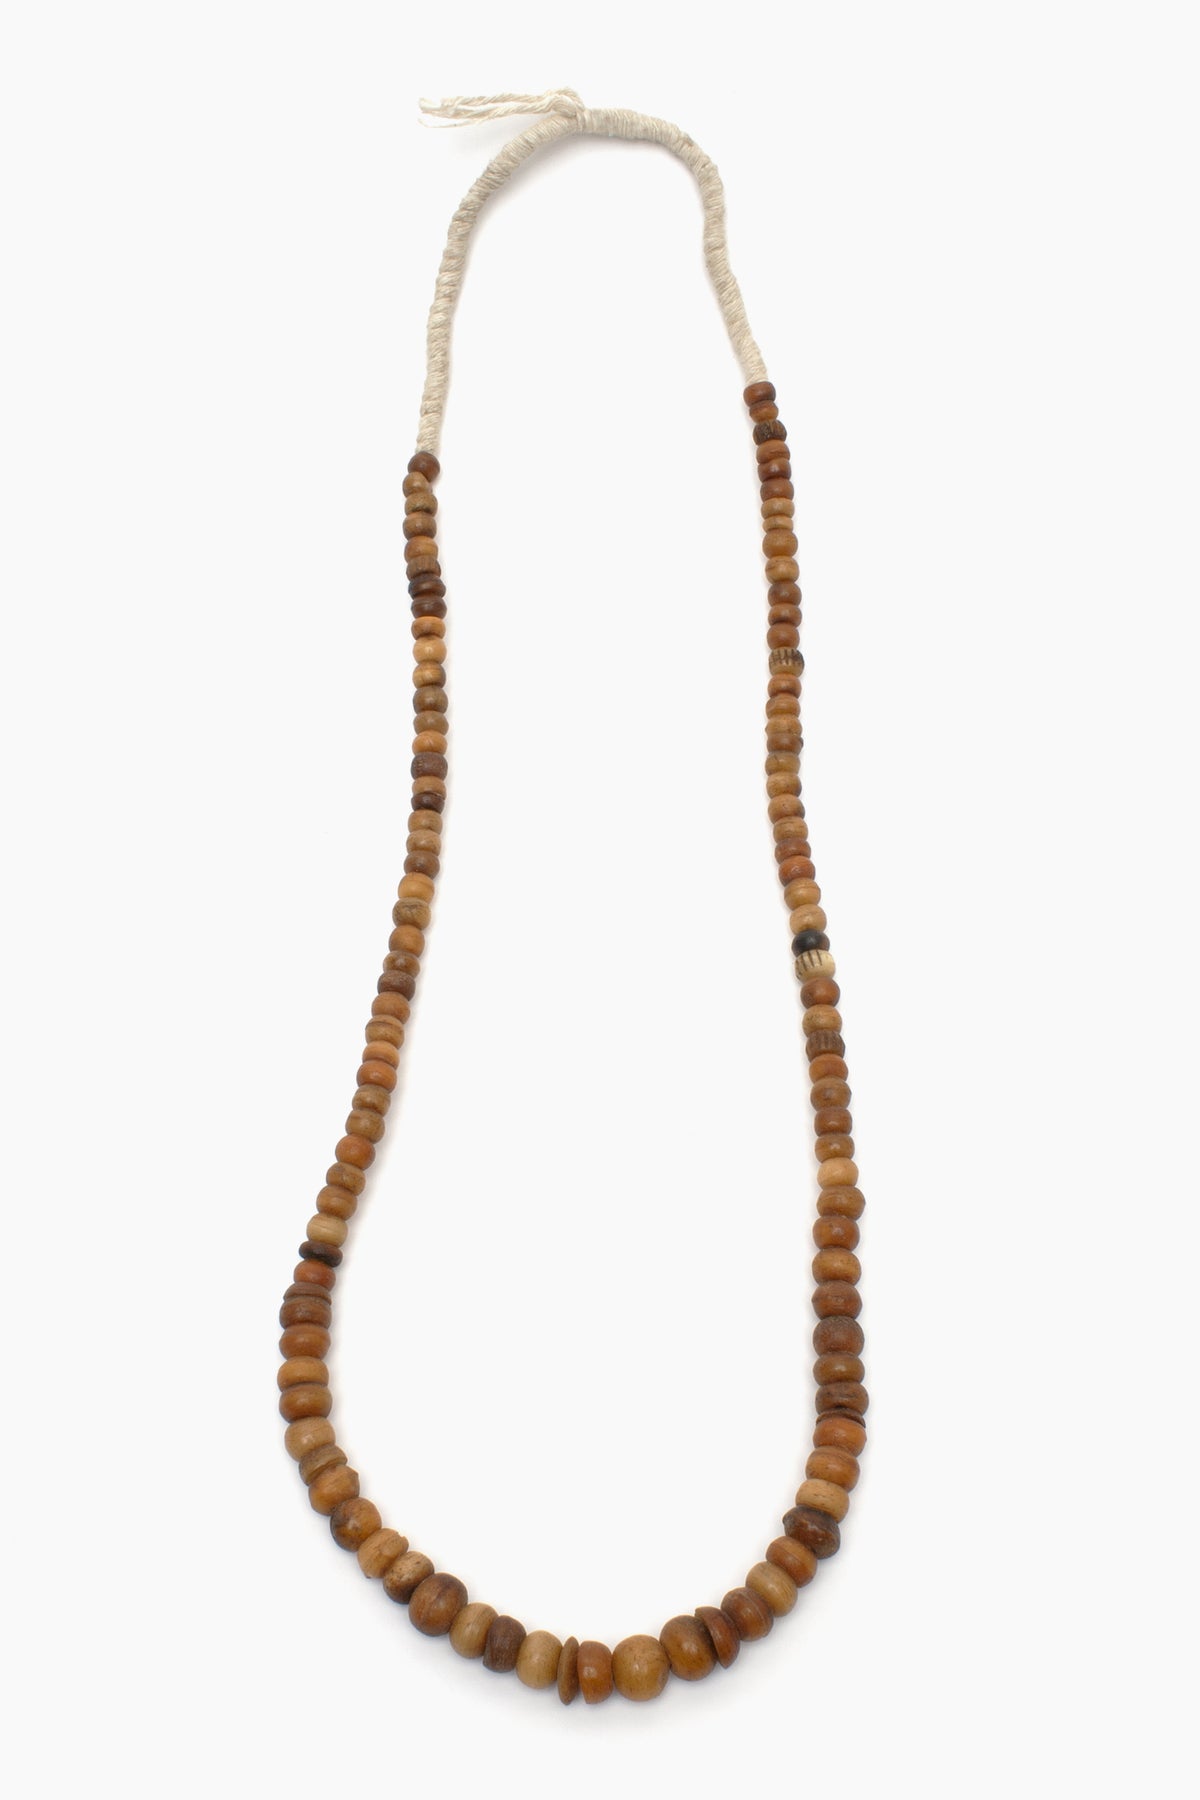 Strand of Old Camel Beads from Senegal